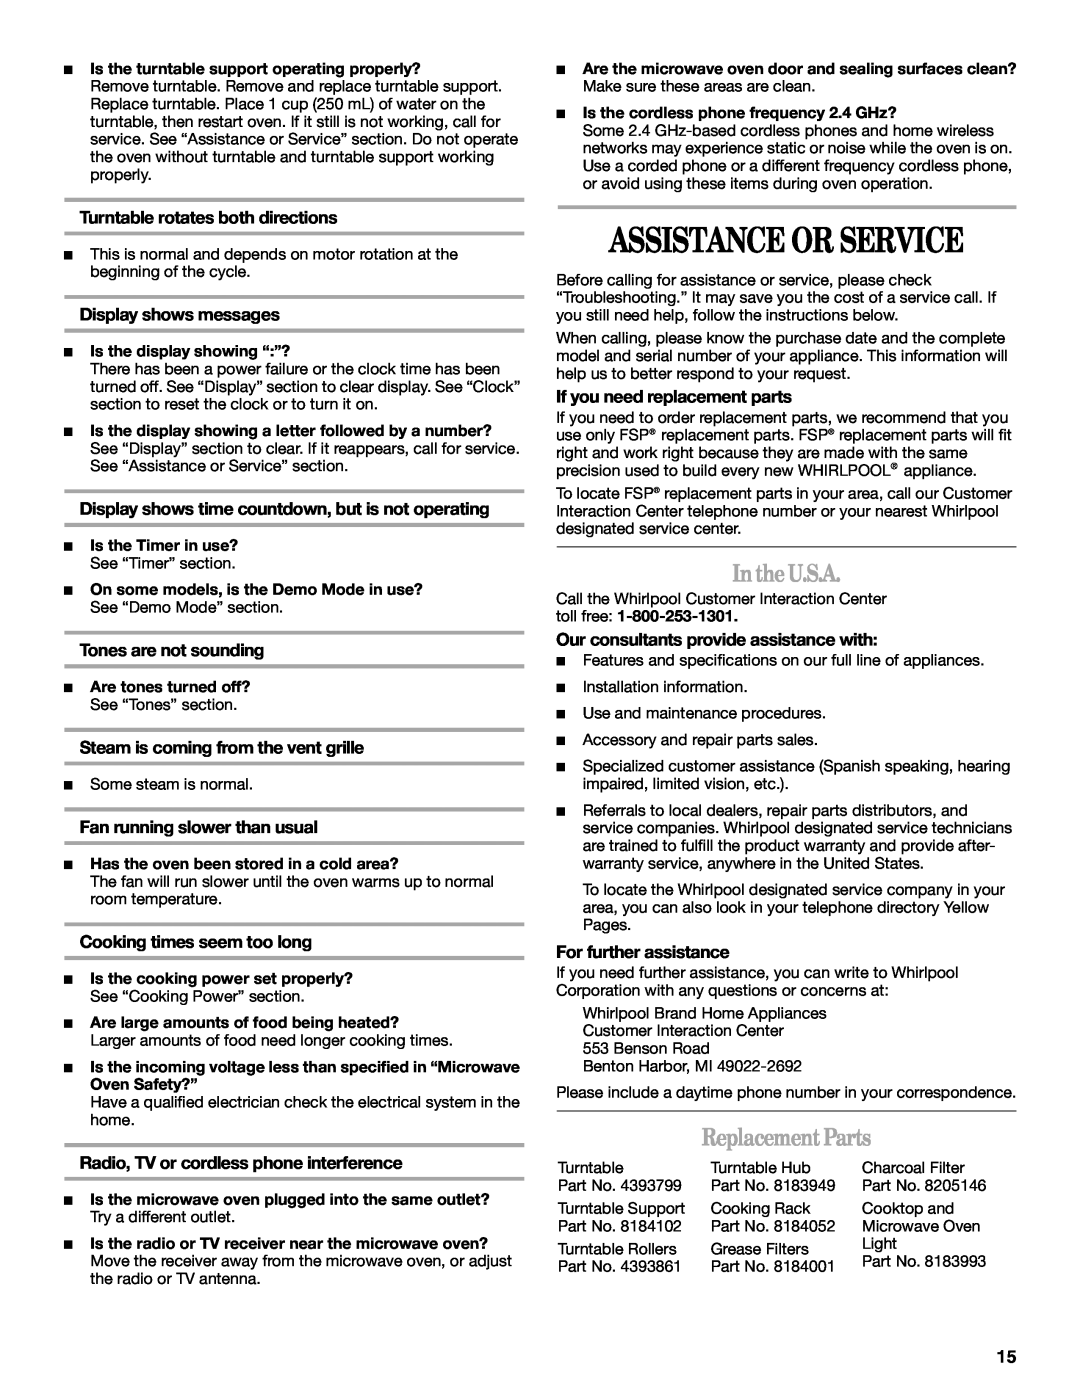 Whirlpool MH3184XPS manual Assistance Or Service, Inthe U.S.A, Replacement Parts, Turntable rotates both directions 